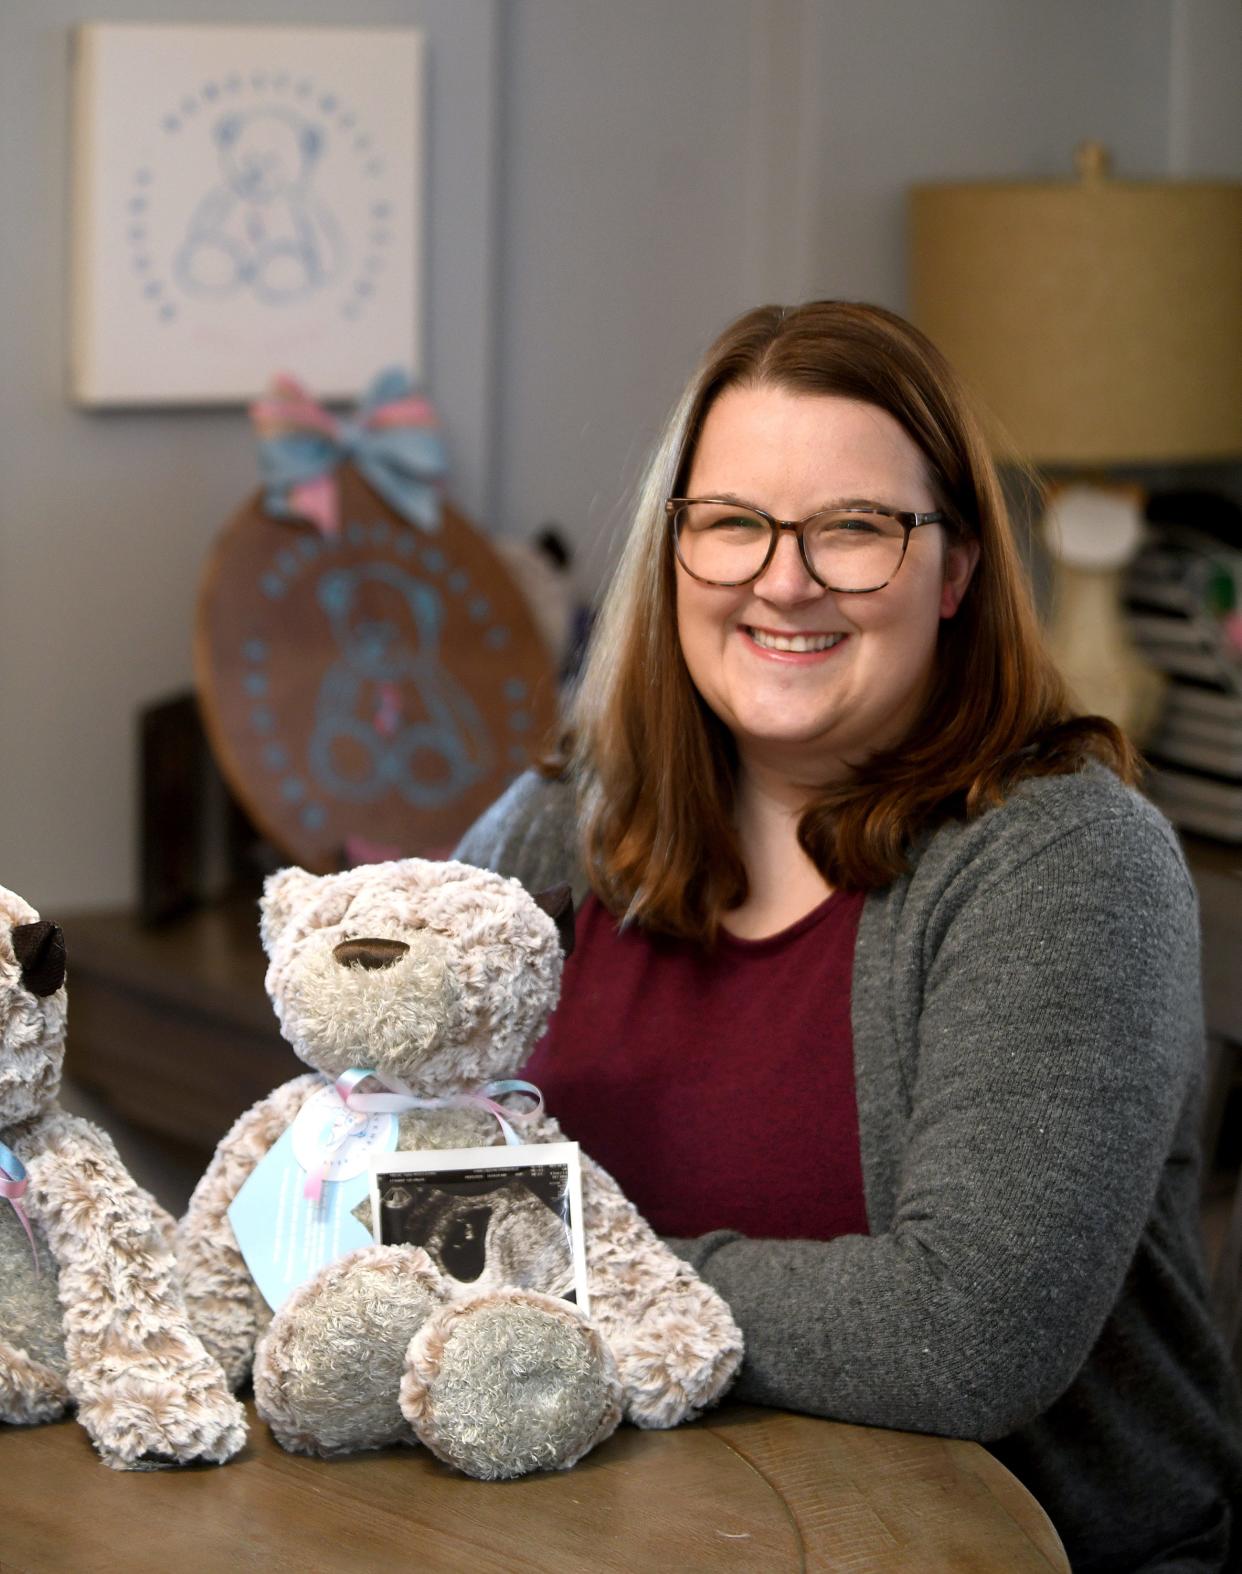 Taylor Prelac of Perry Township founded the nonprofit Brooks Bereavement Bears following a pregnancy loss. "I’m very grateful that I turned my pain into hope and love by helping comfort other women who are going through the same kind of loss," she said.